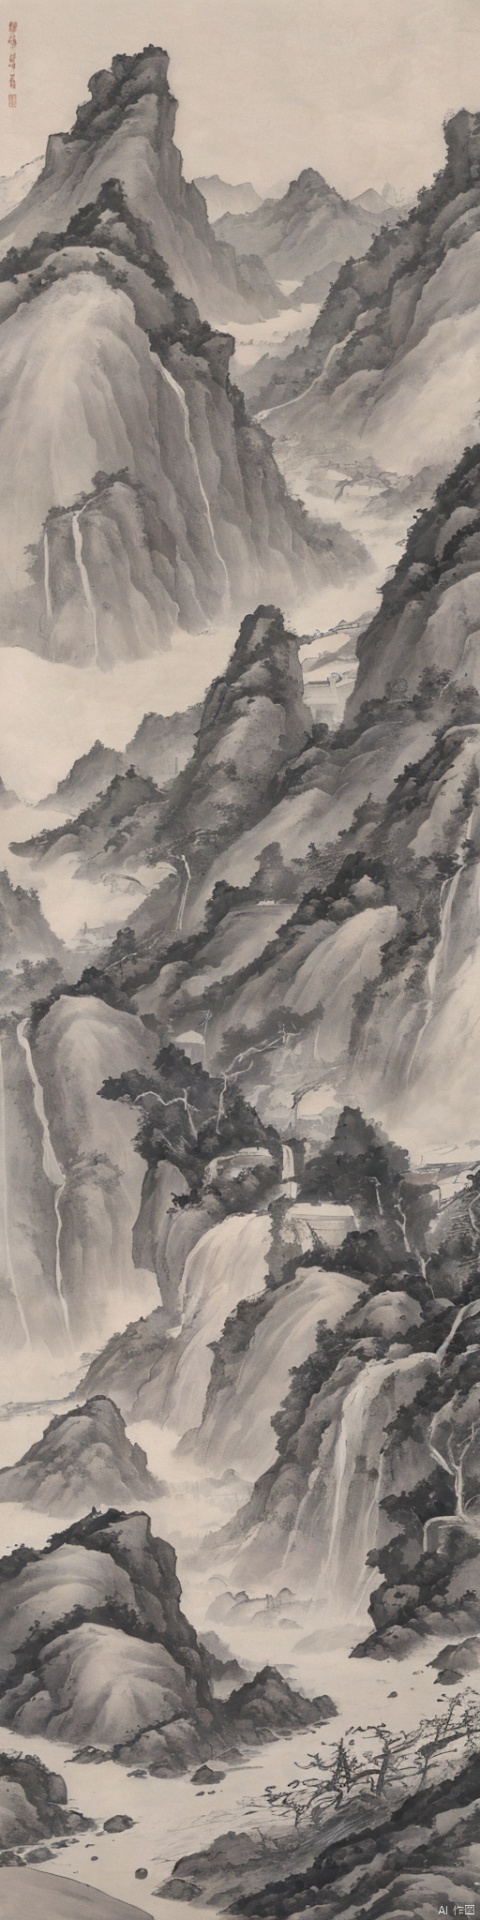  Traditional Chinese landscape painting, Chinese freehand brushwork, Qing Dynasty landscape painter Gong Xianstyle,mountains,trees,waterfalls,waterflow,inkaccumulationmethod,heavy,vast国画,chinesepaiting,Chinesepaiting,国风, chinese paiting